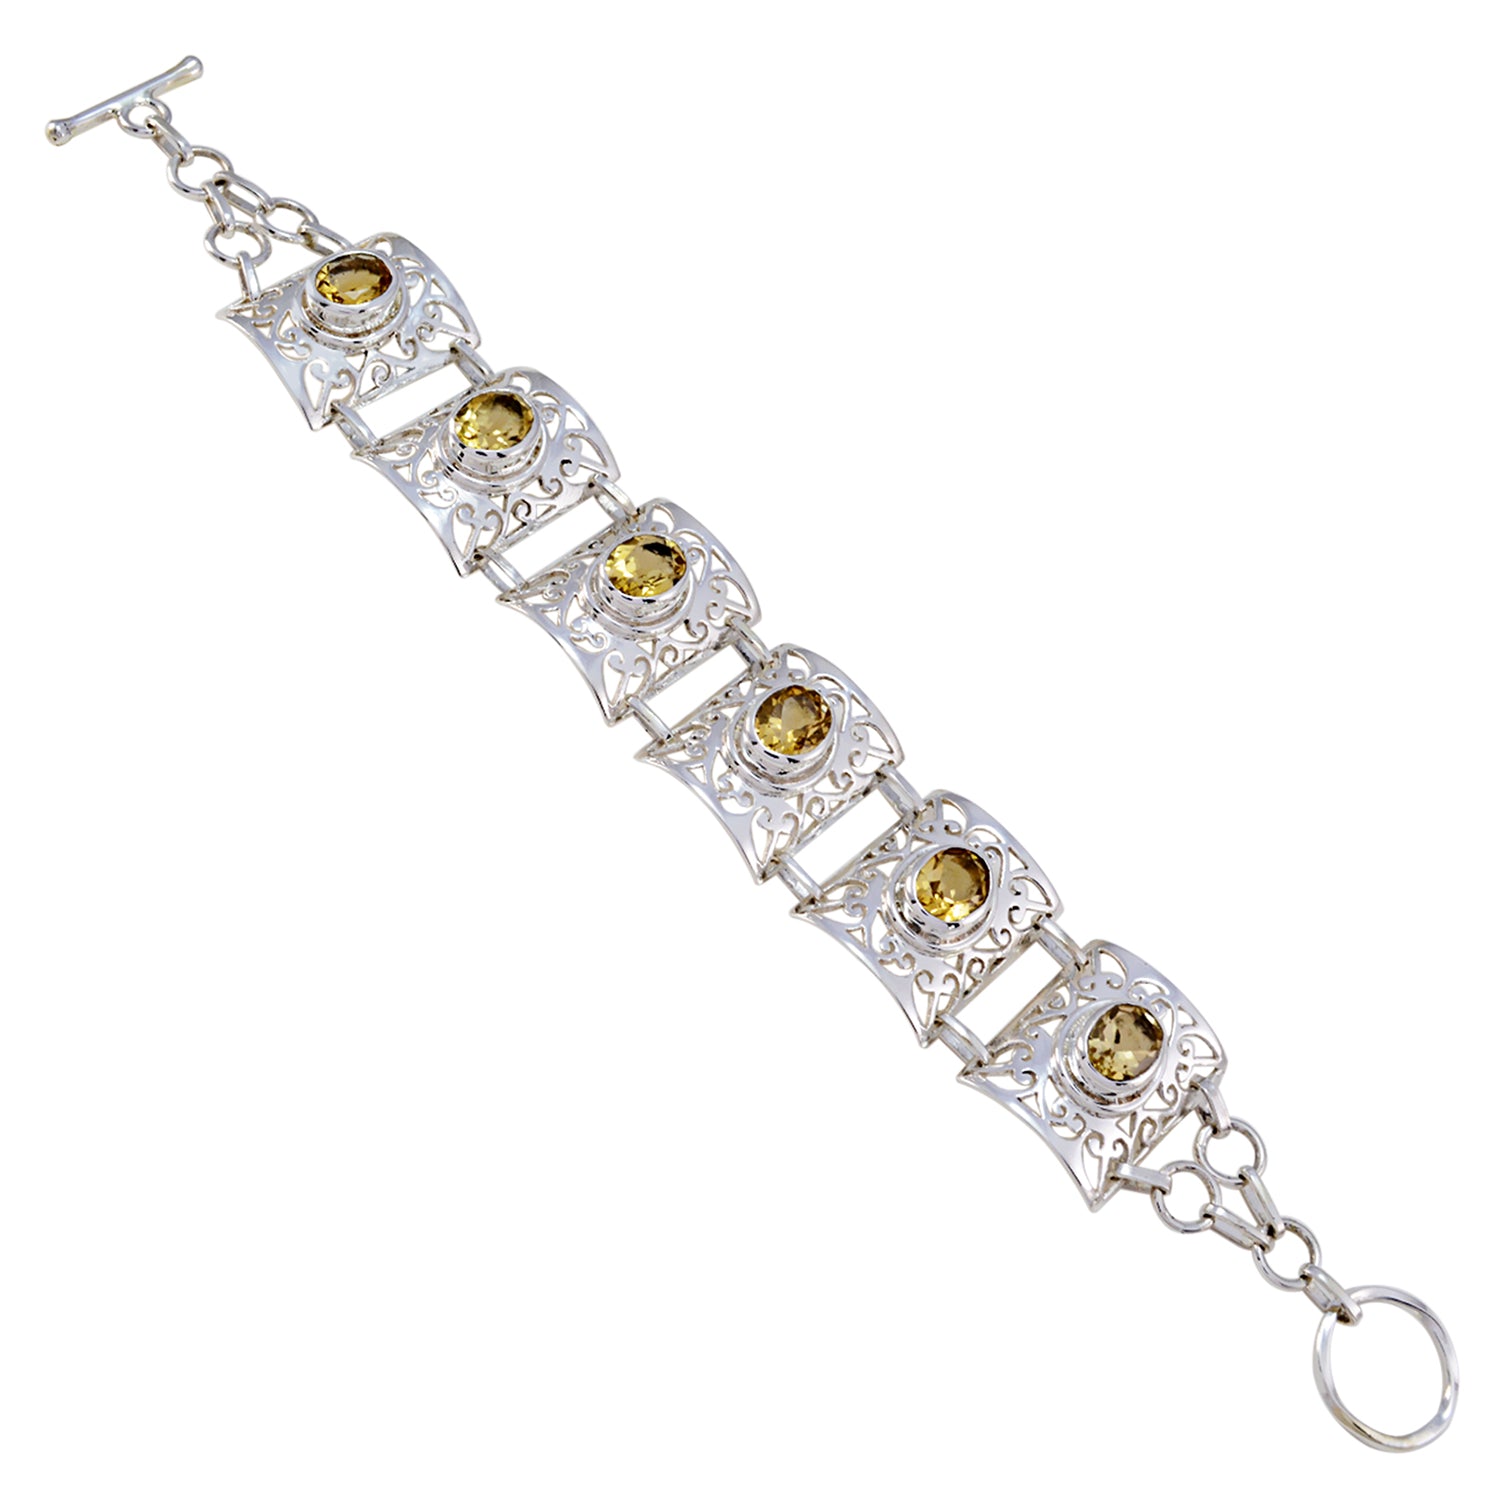 Riyo Natural Gemstone Oval Faceted Yellow Citrine Silver Bracelet gift for friend